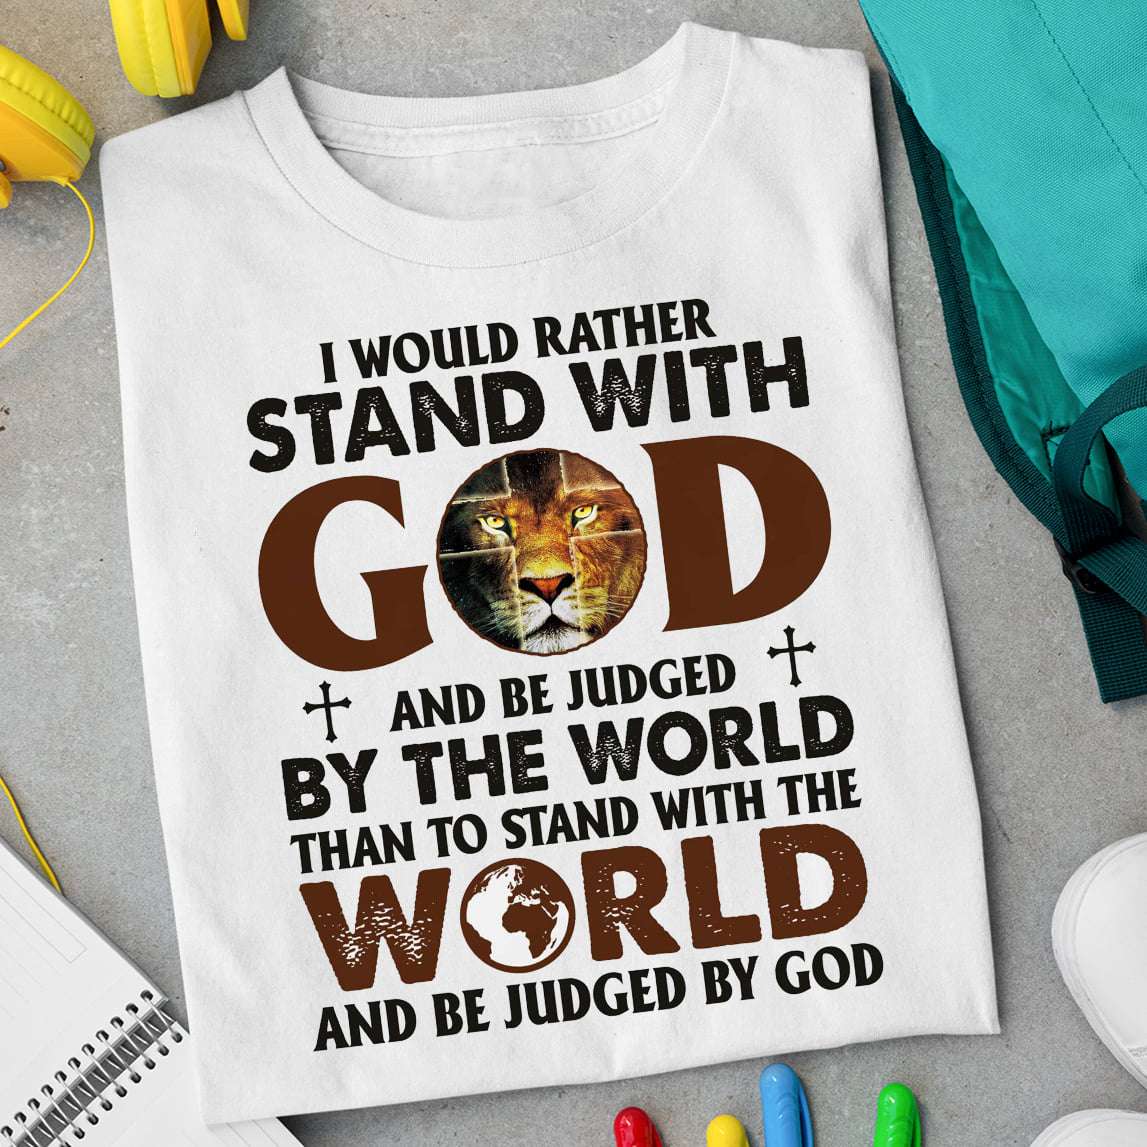 I would rather stand with god and be judged by the world - Lion and Jesus, Jesus the god